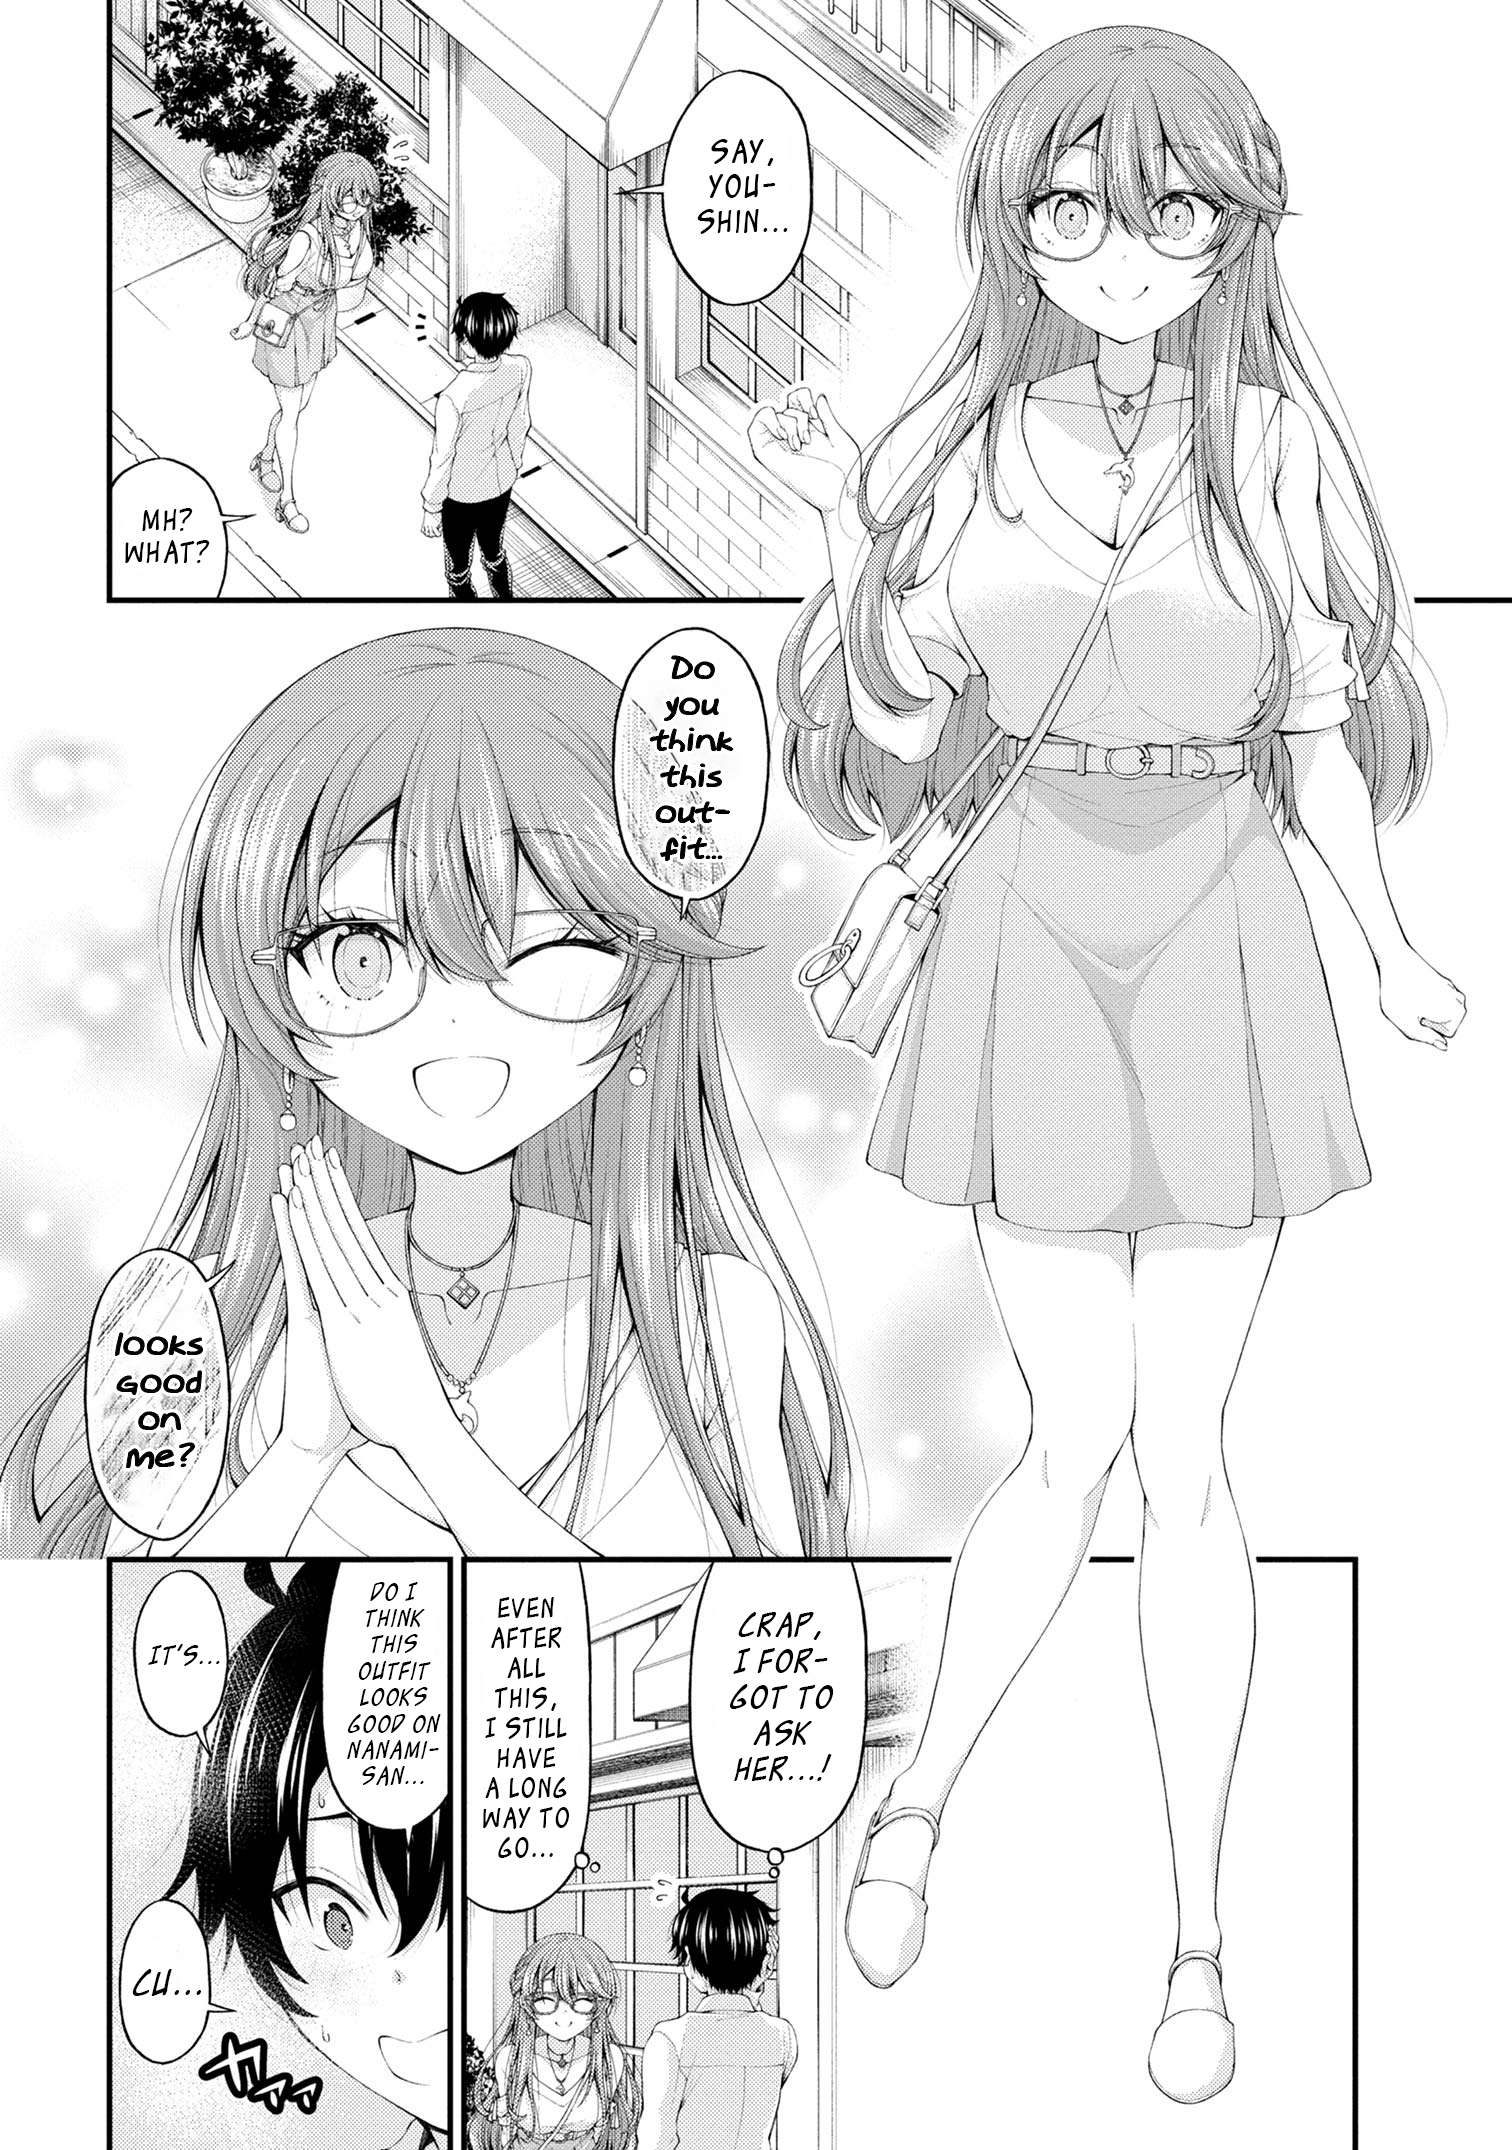 The Gal Who Was Meant to Confess to Me as a Game Punishment - chapter 10 - #2